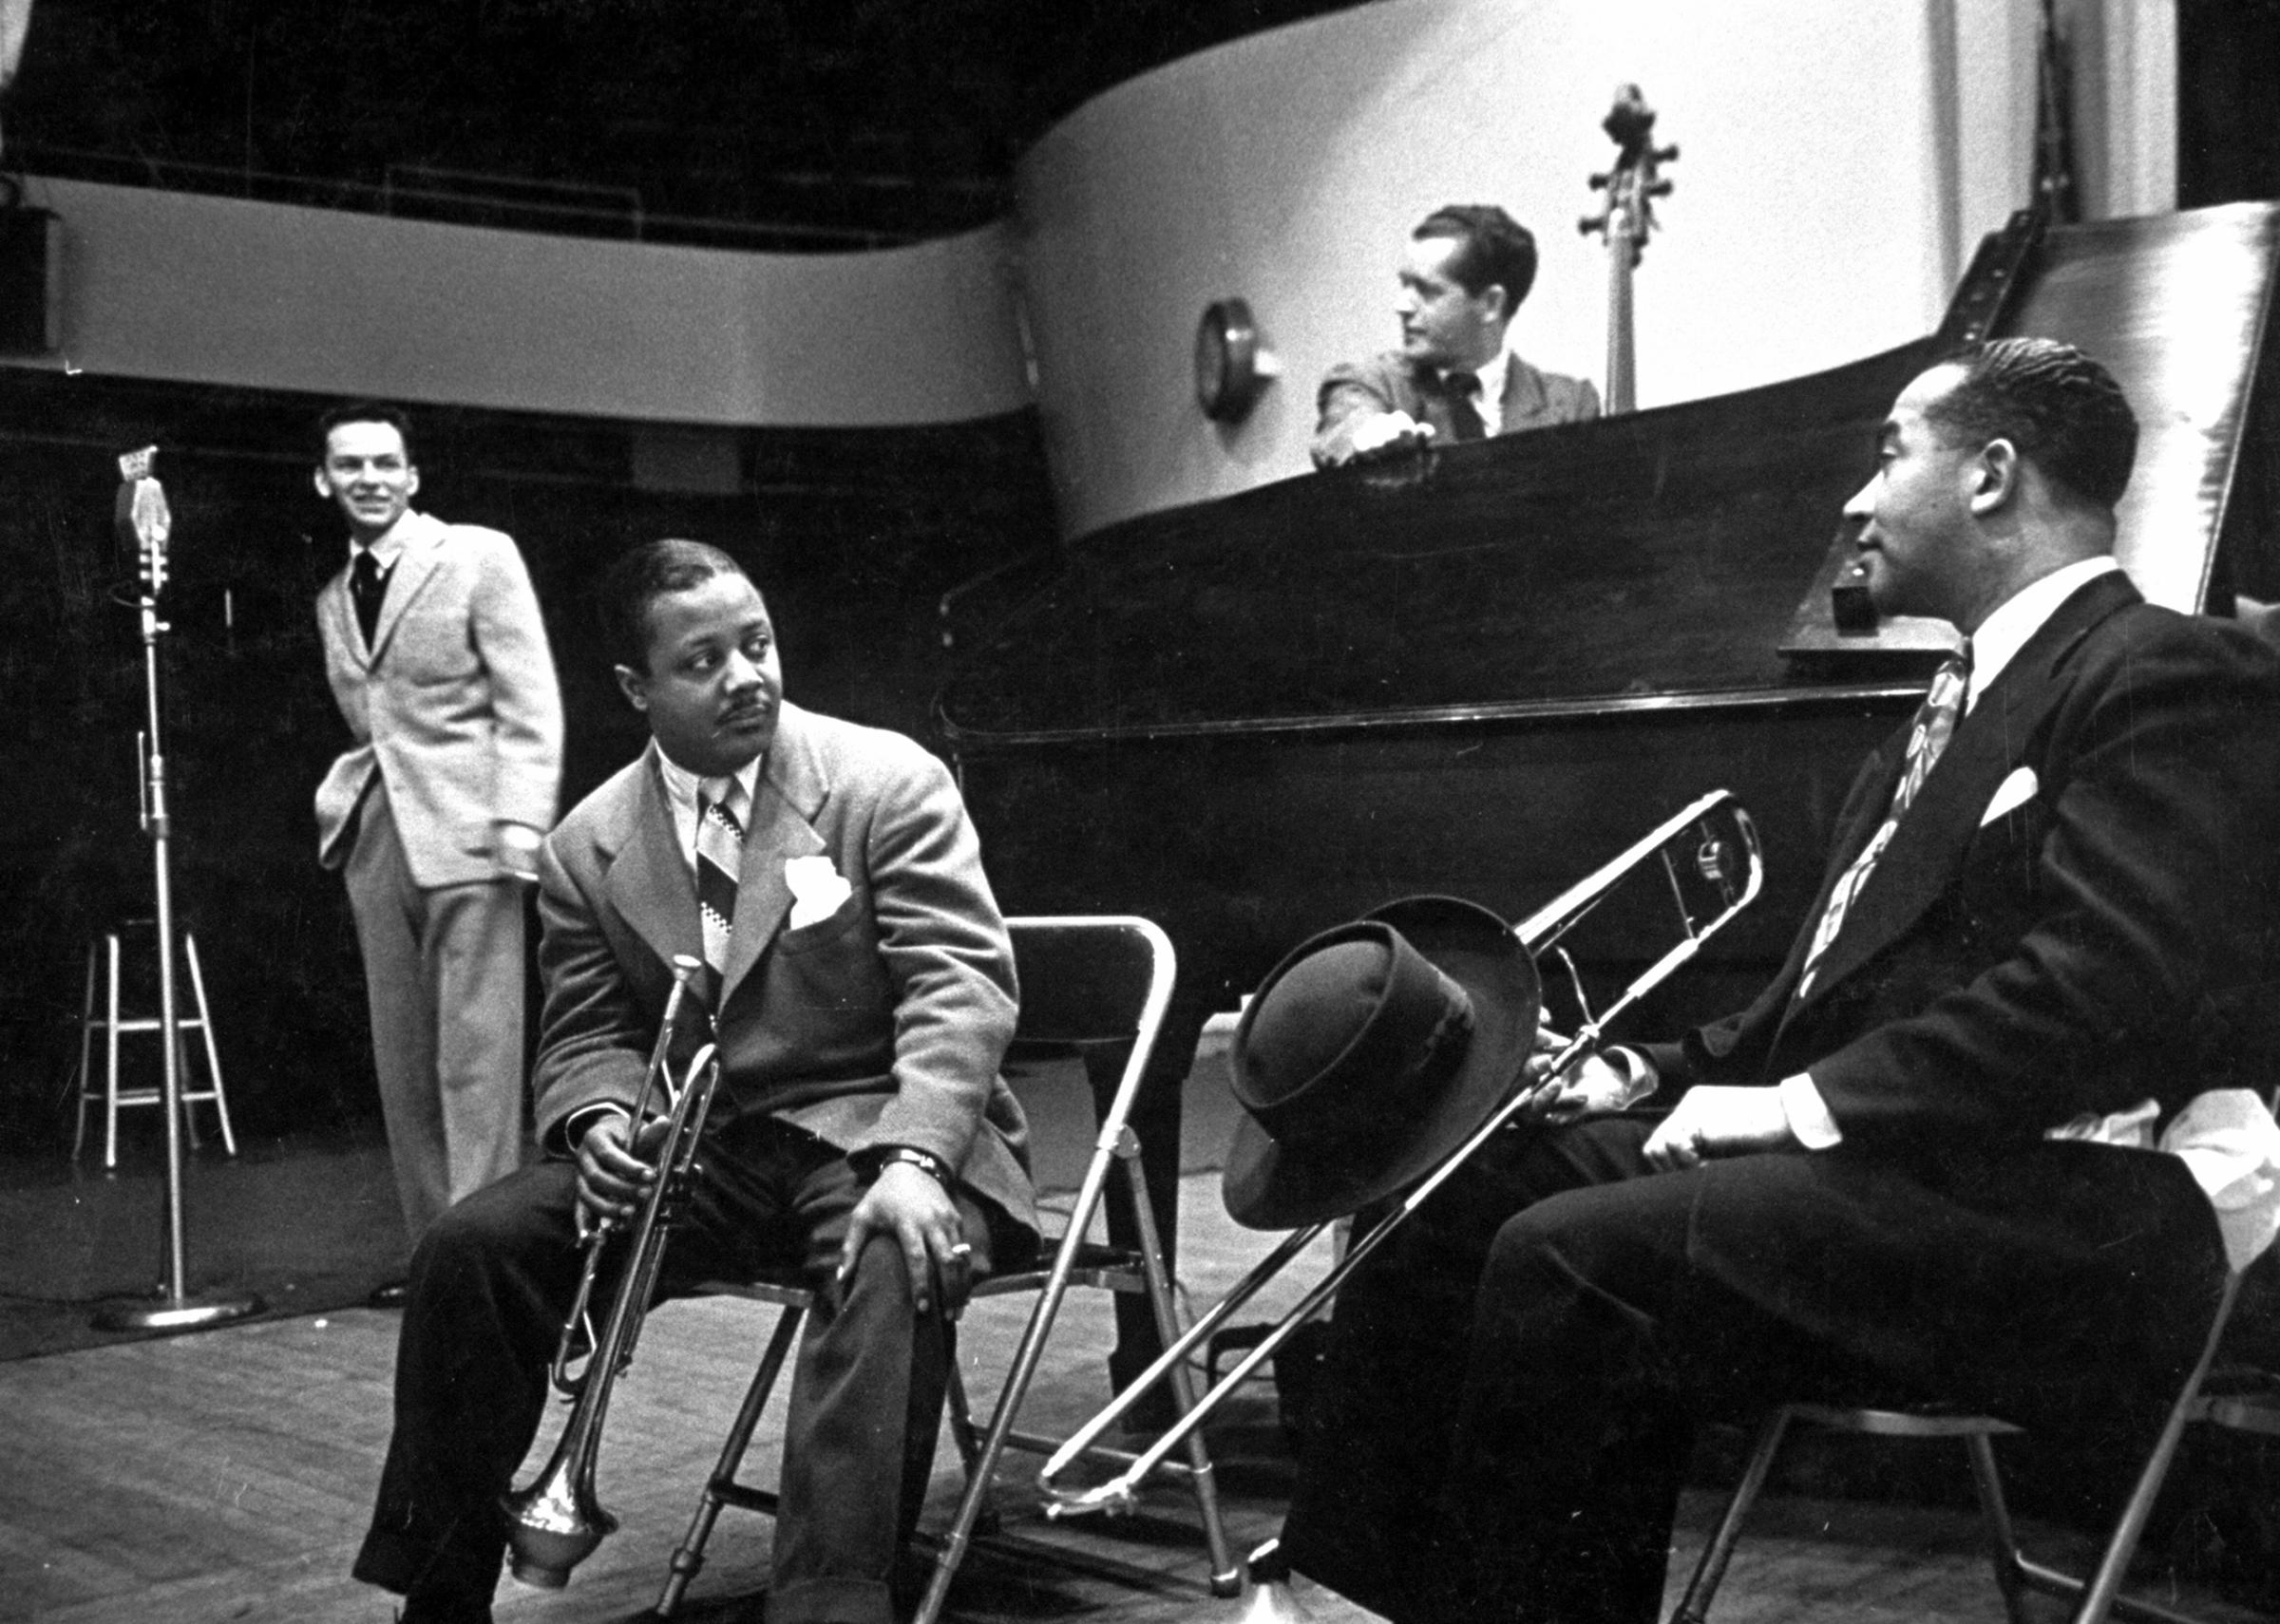 Frank Sinatra and musicians in studio during recording session at CBS.